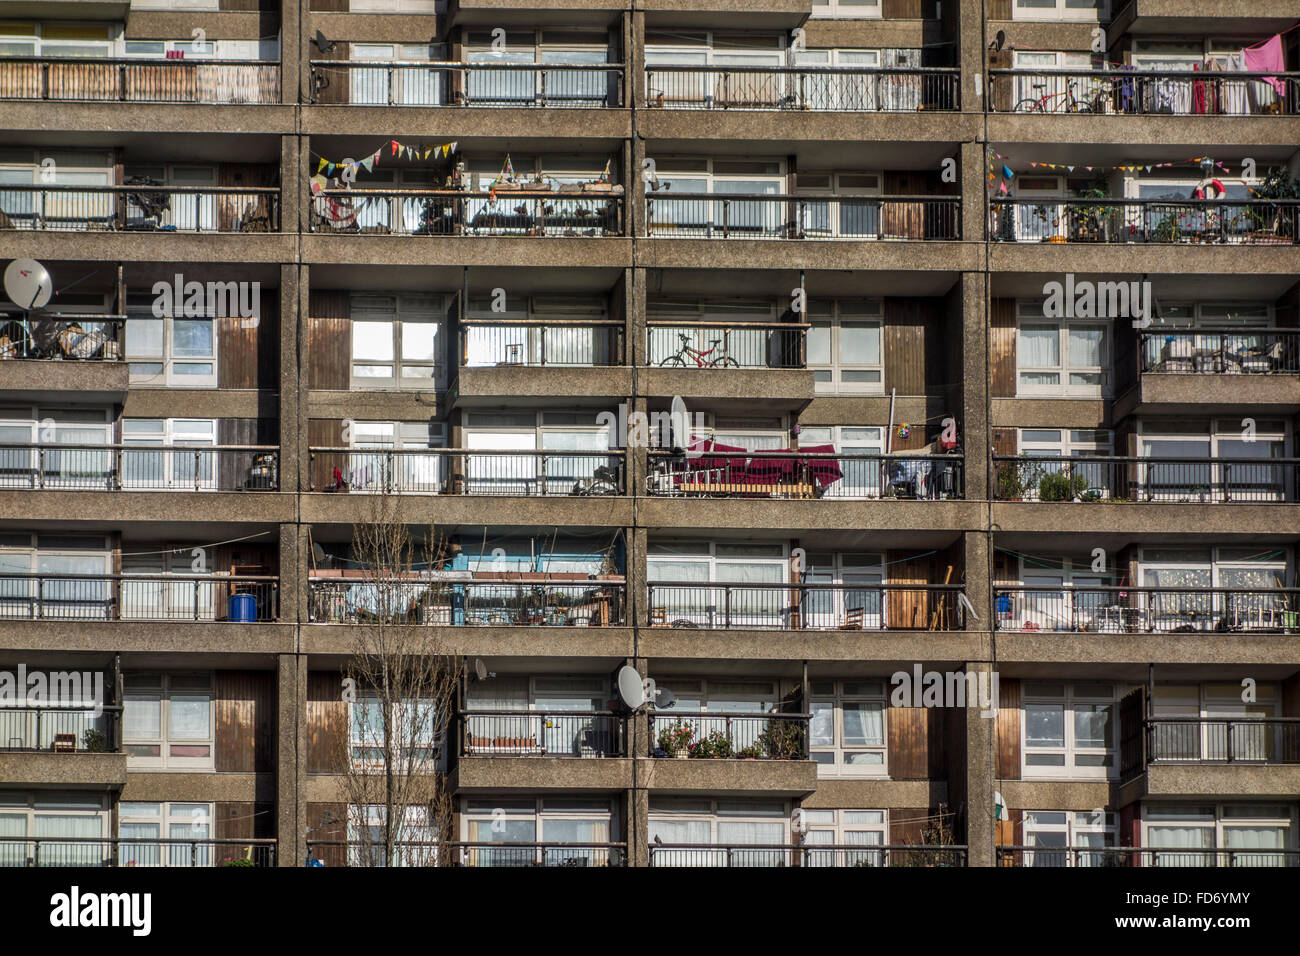 Brutalism: Close-up view of brutalist architecture of Trellick Tower, North Kensington, London, UK Stock Photo